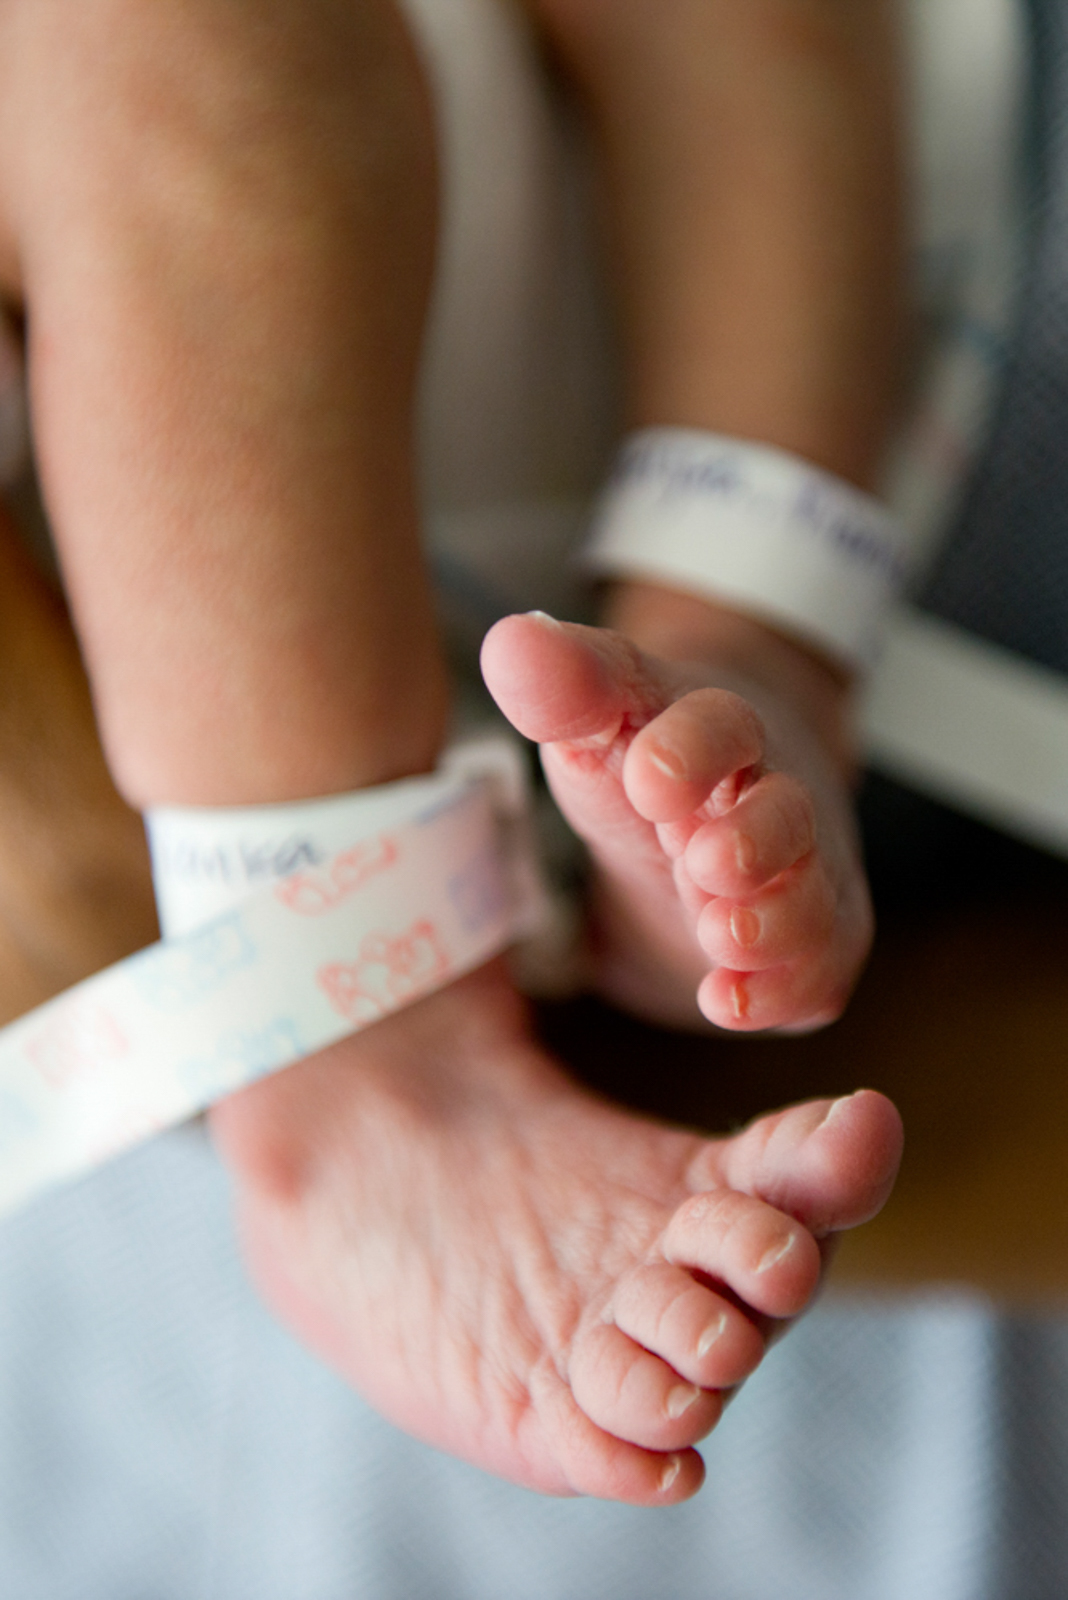 Detail shot of newborn's feet with tags around ankles